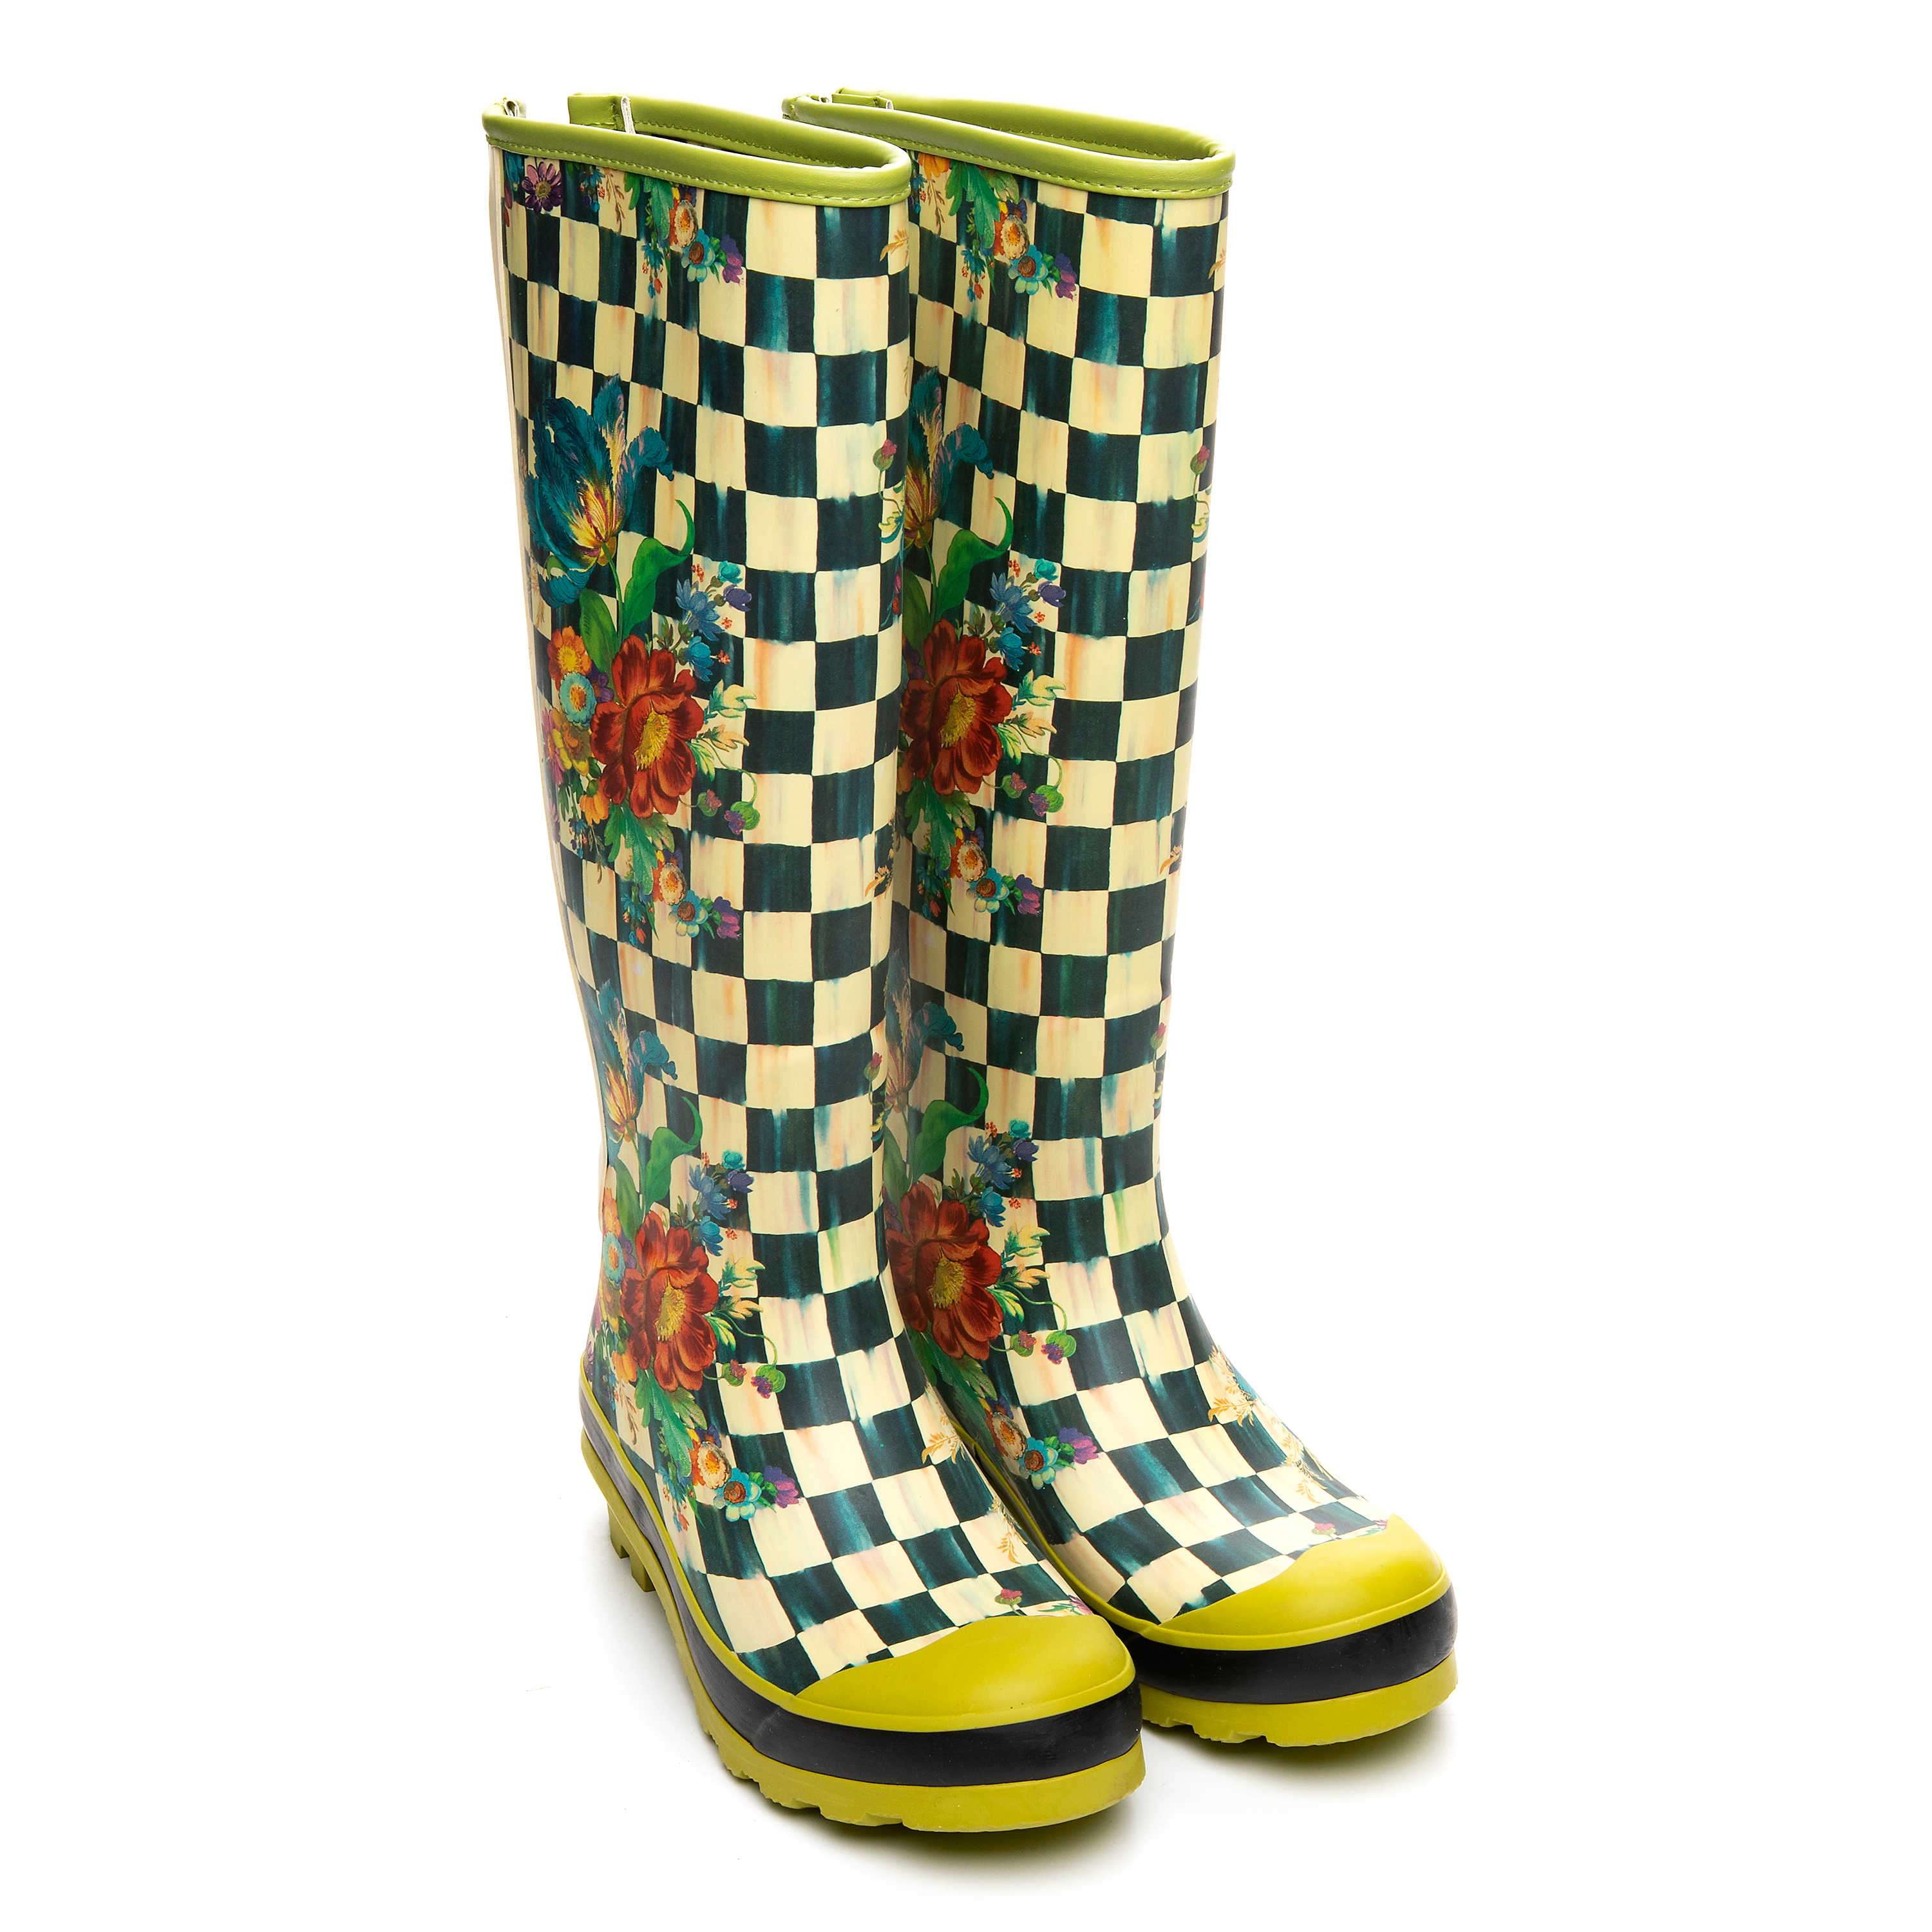 Courtly Check Rain Boots - Tall - Size 6 mackenzie-childs Panama 0